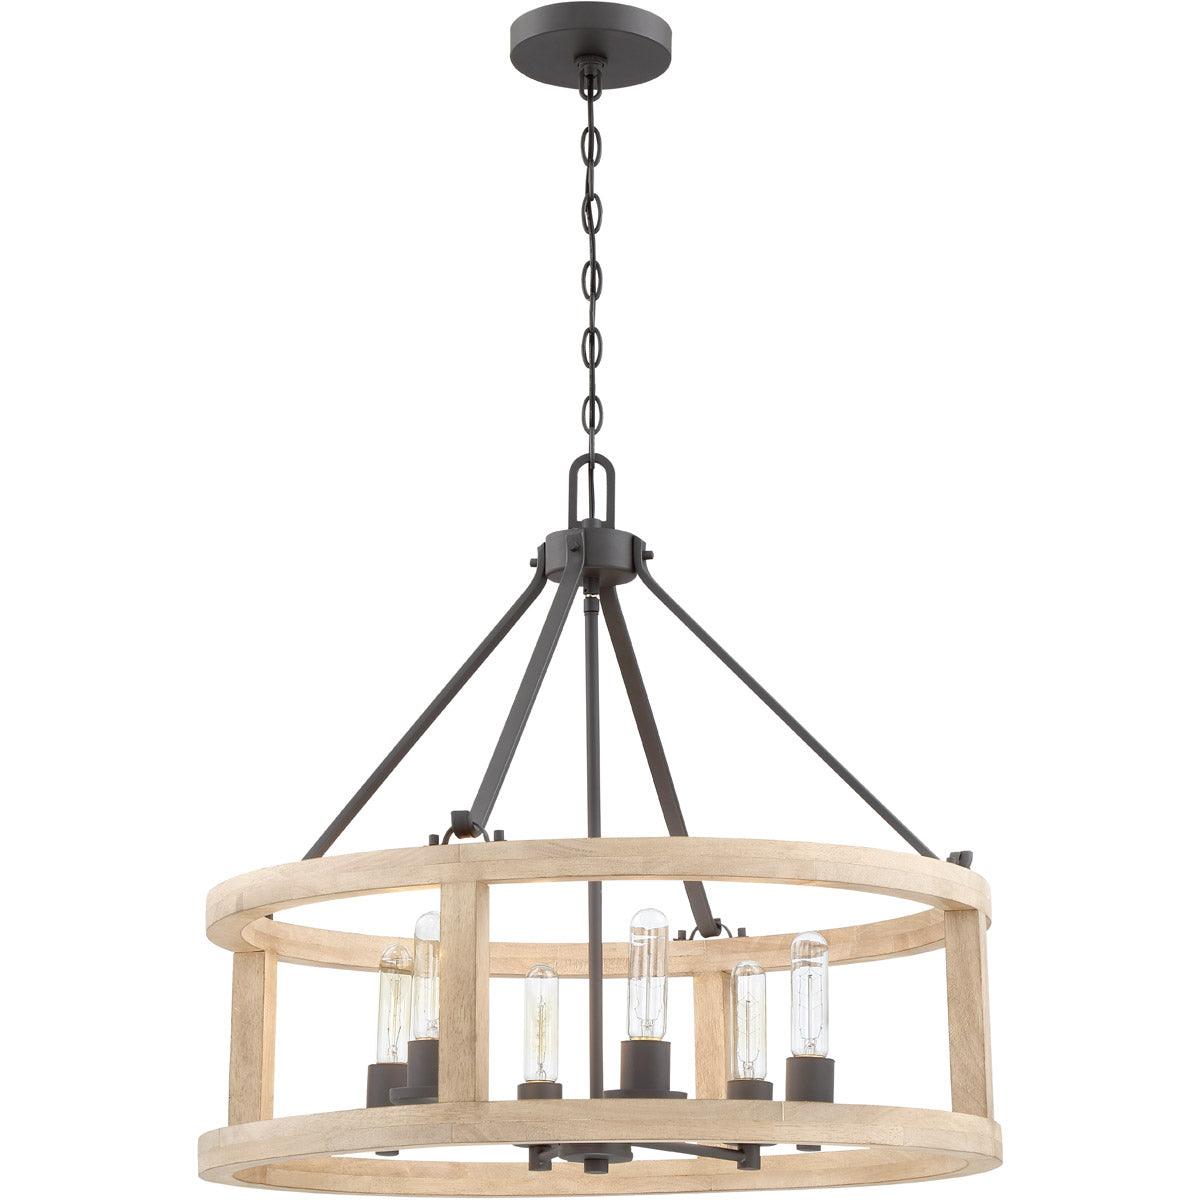 Cast Iron with Distressed Oak Frame Chandelier - LV LIGHTING